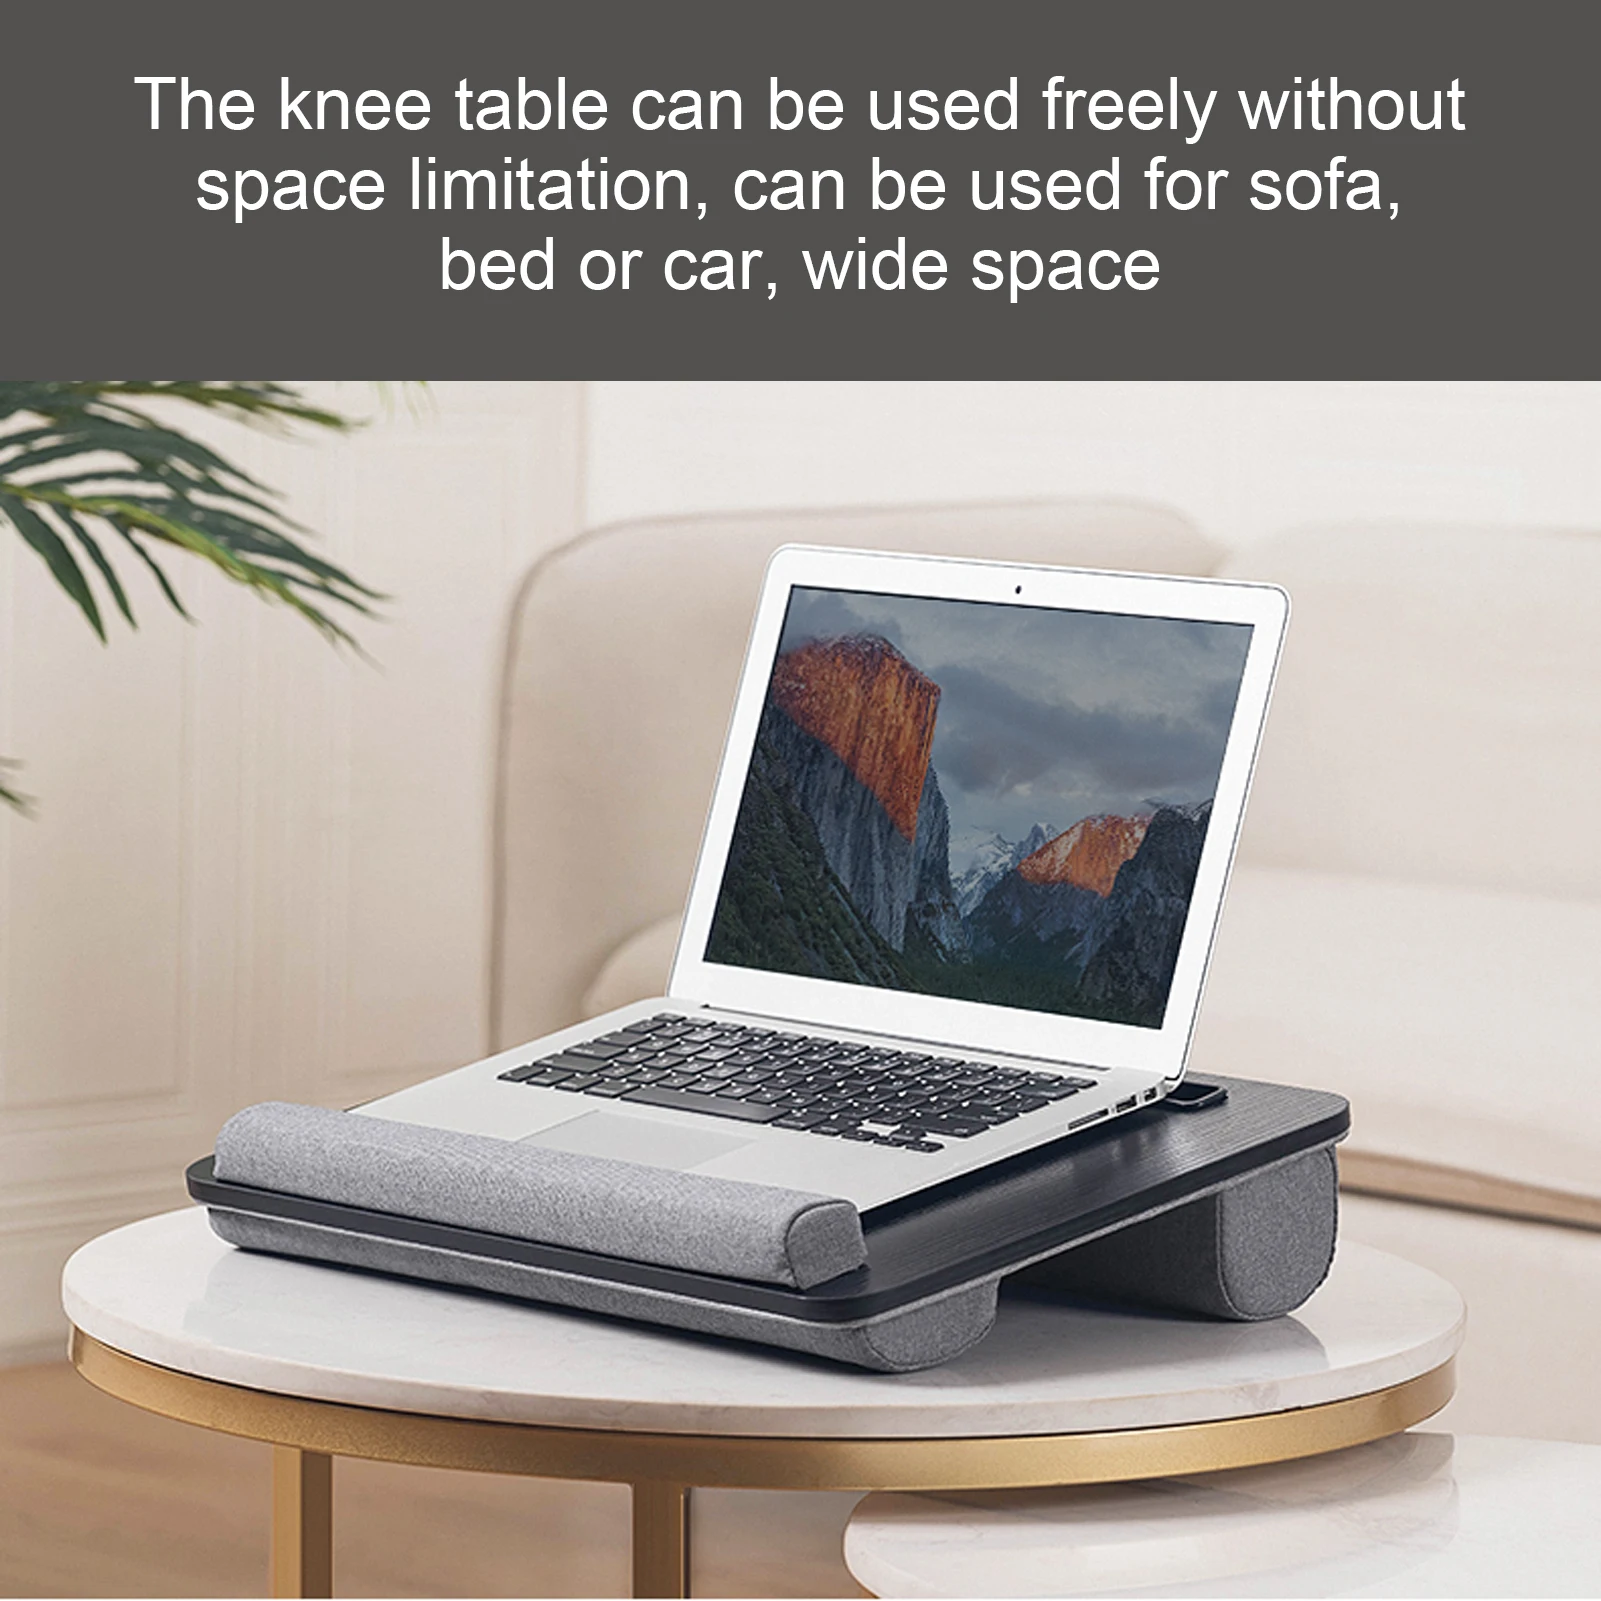 Lap Desk Home Office Multifunctional Pillow Soft Base Laptop desk Sofa Lazy  Bed Desk Gaming Desk with Mouse Pad Phone Holder - AliExpress